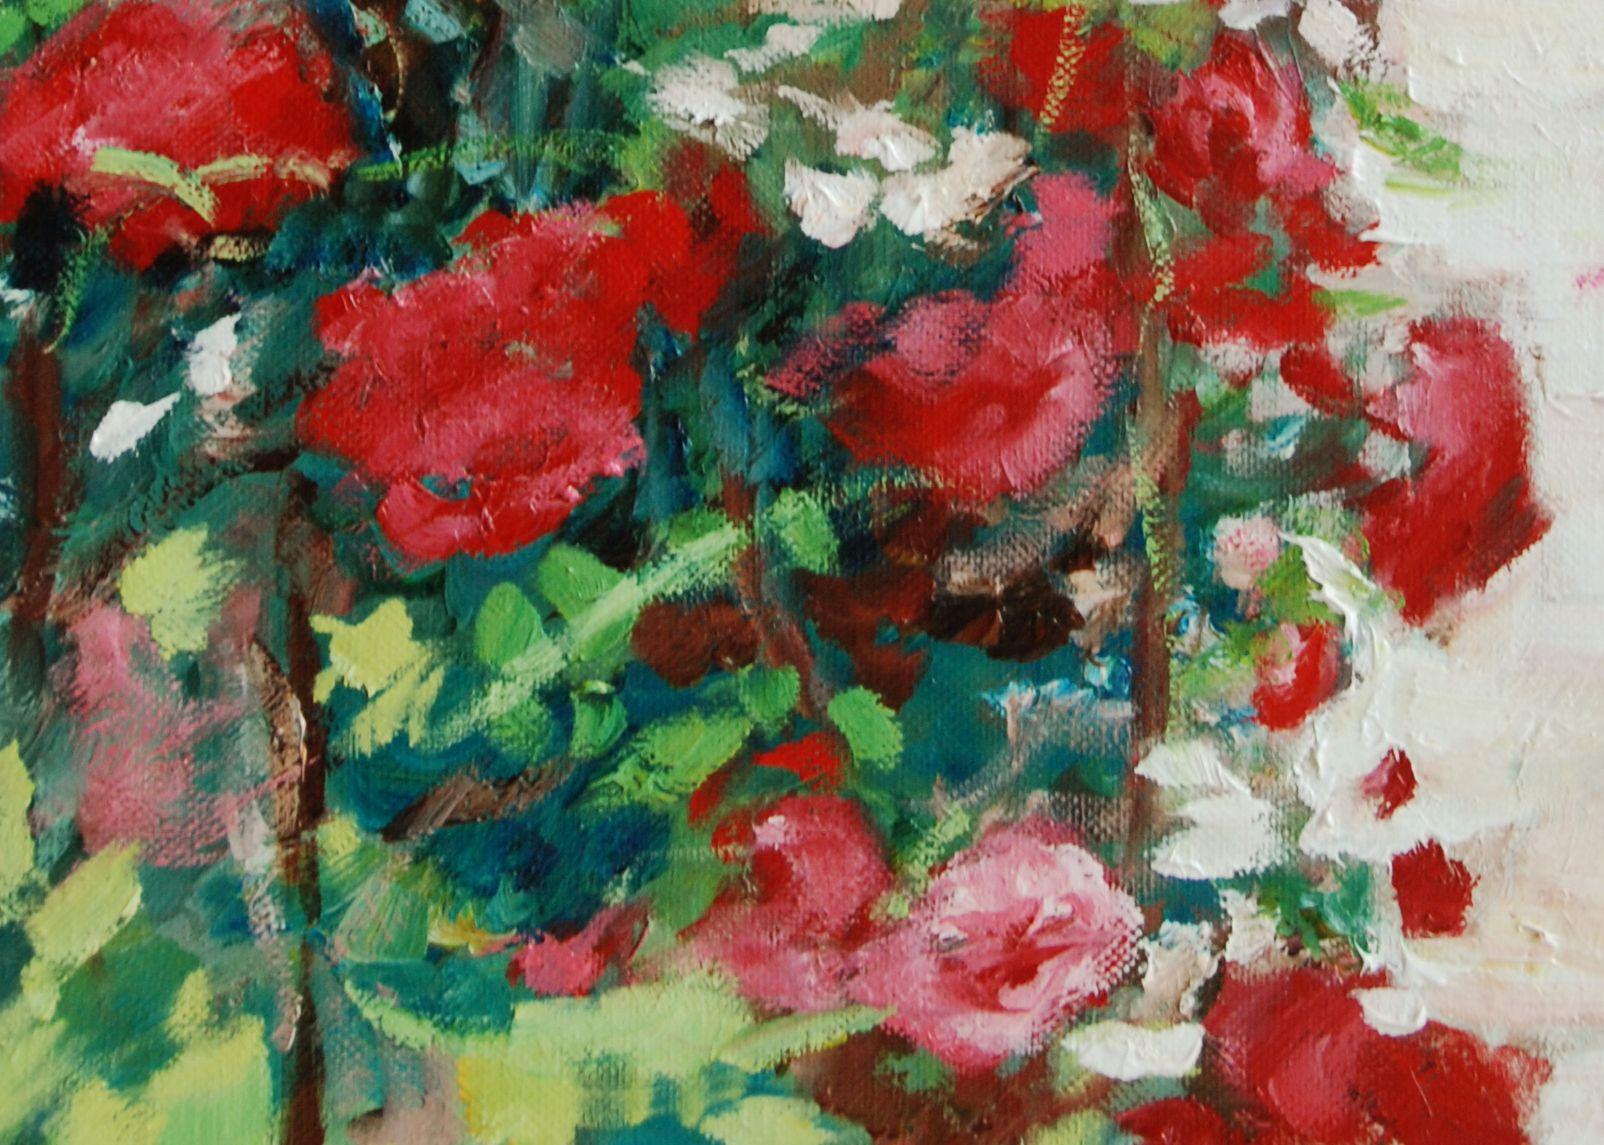 Original oil painting on canvas of walkers in a public garden in France during flowering roses, people sitting on a bench. Painting the rose garden in a public garden in Nancy. :: Painting :: Impressionist :: This piece comes with an official